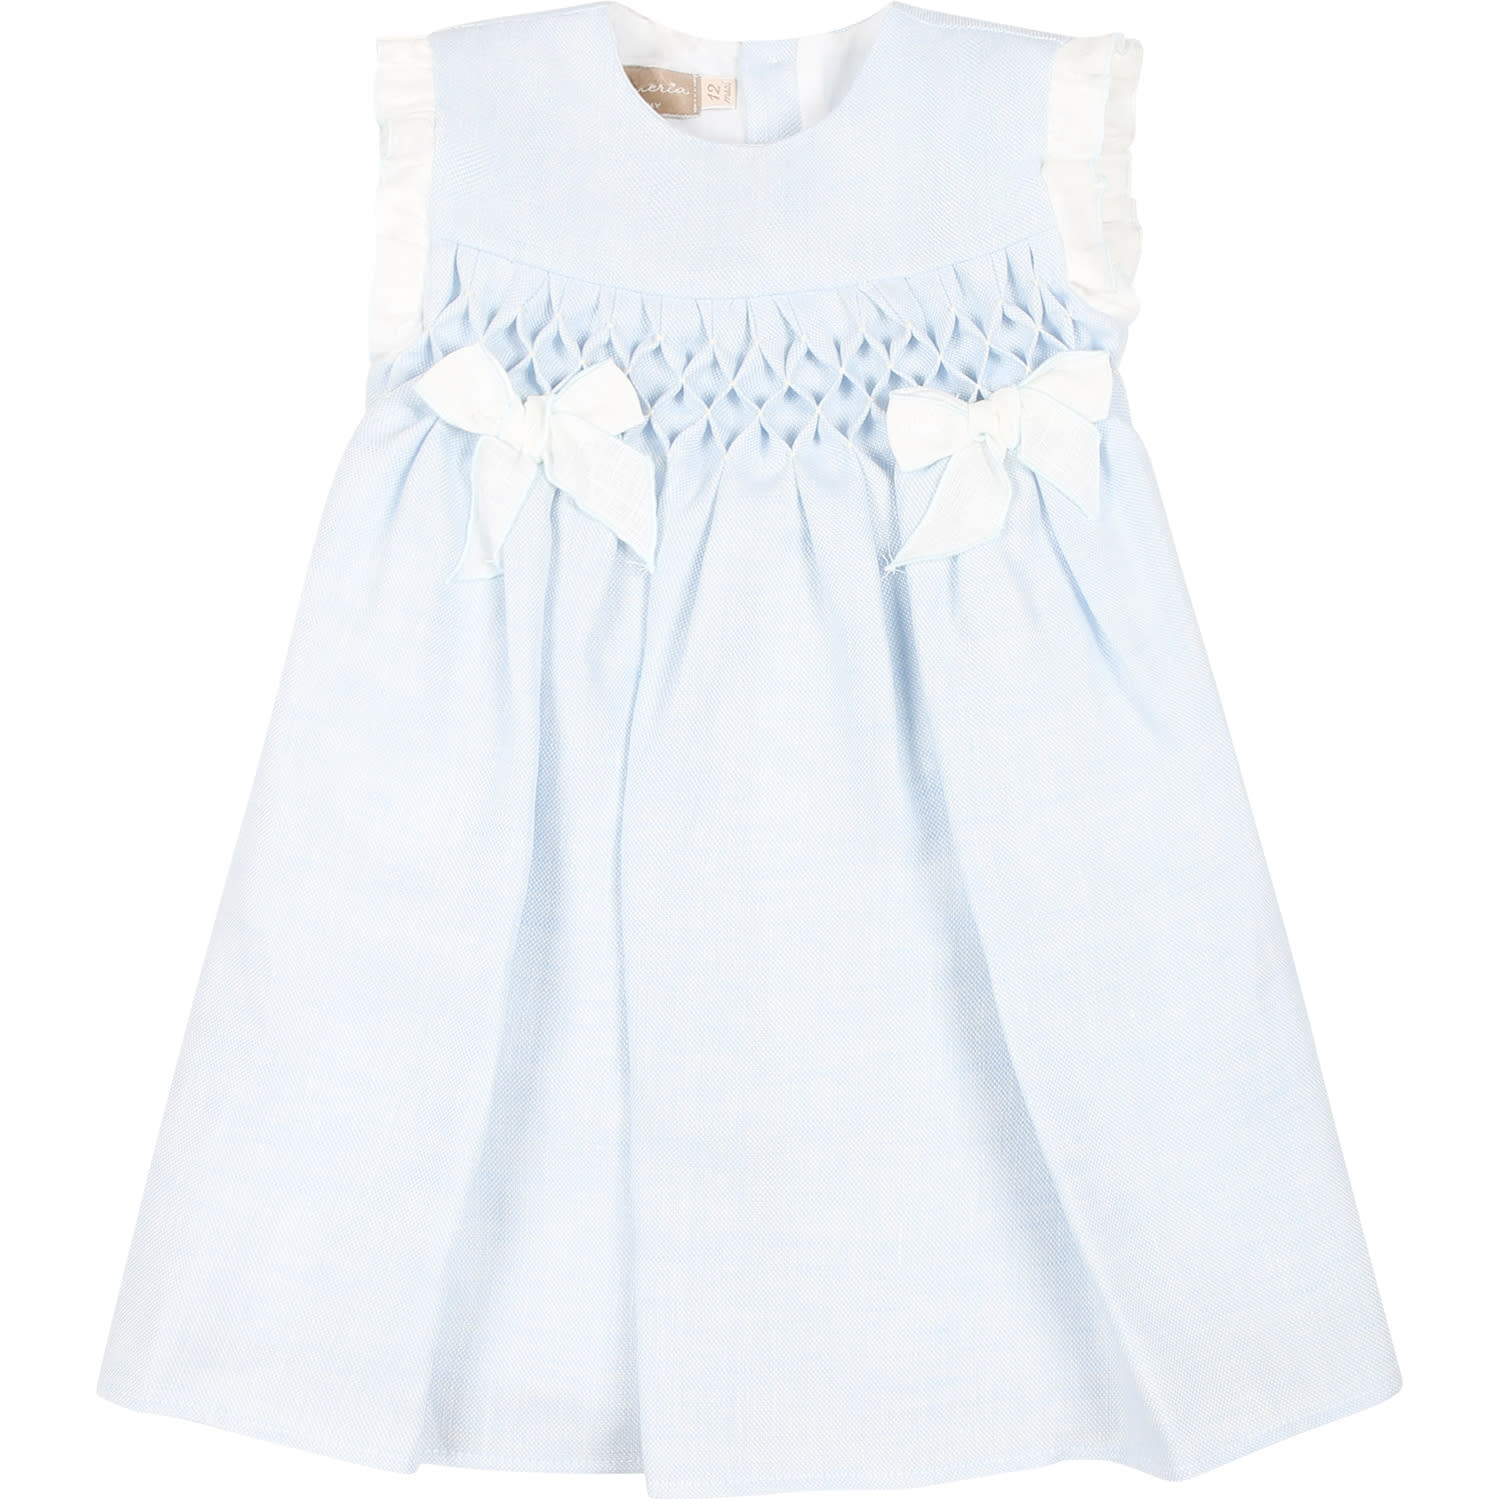 Shop La Stupenderia Light Blue Dress For Baby Girl With Bows